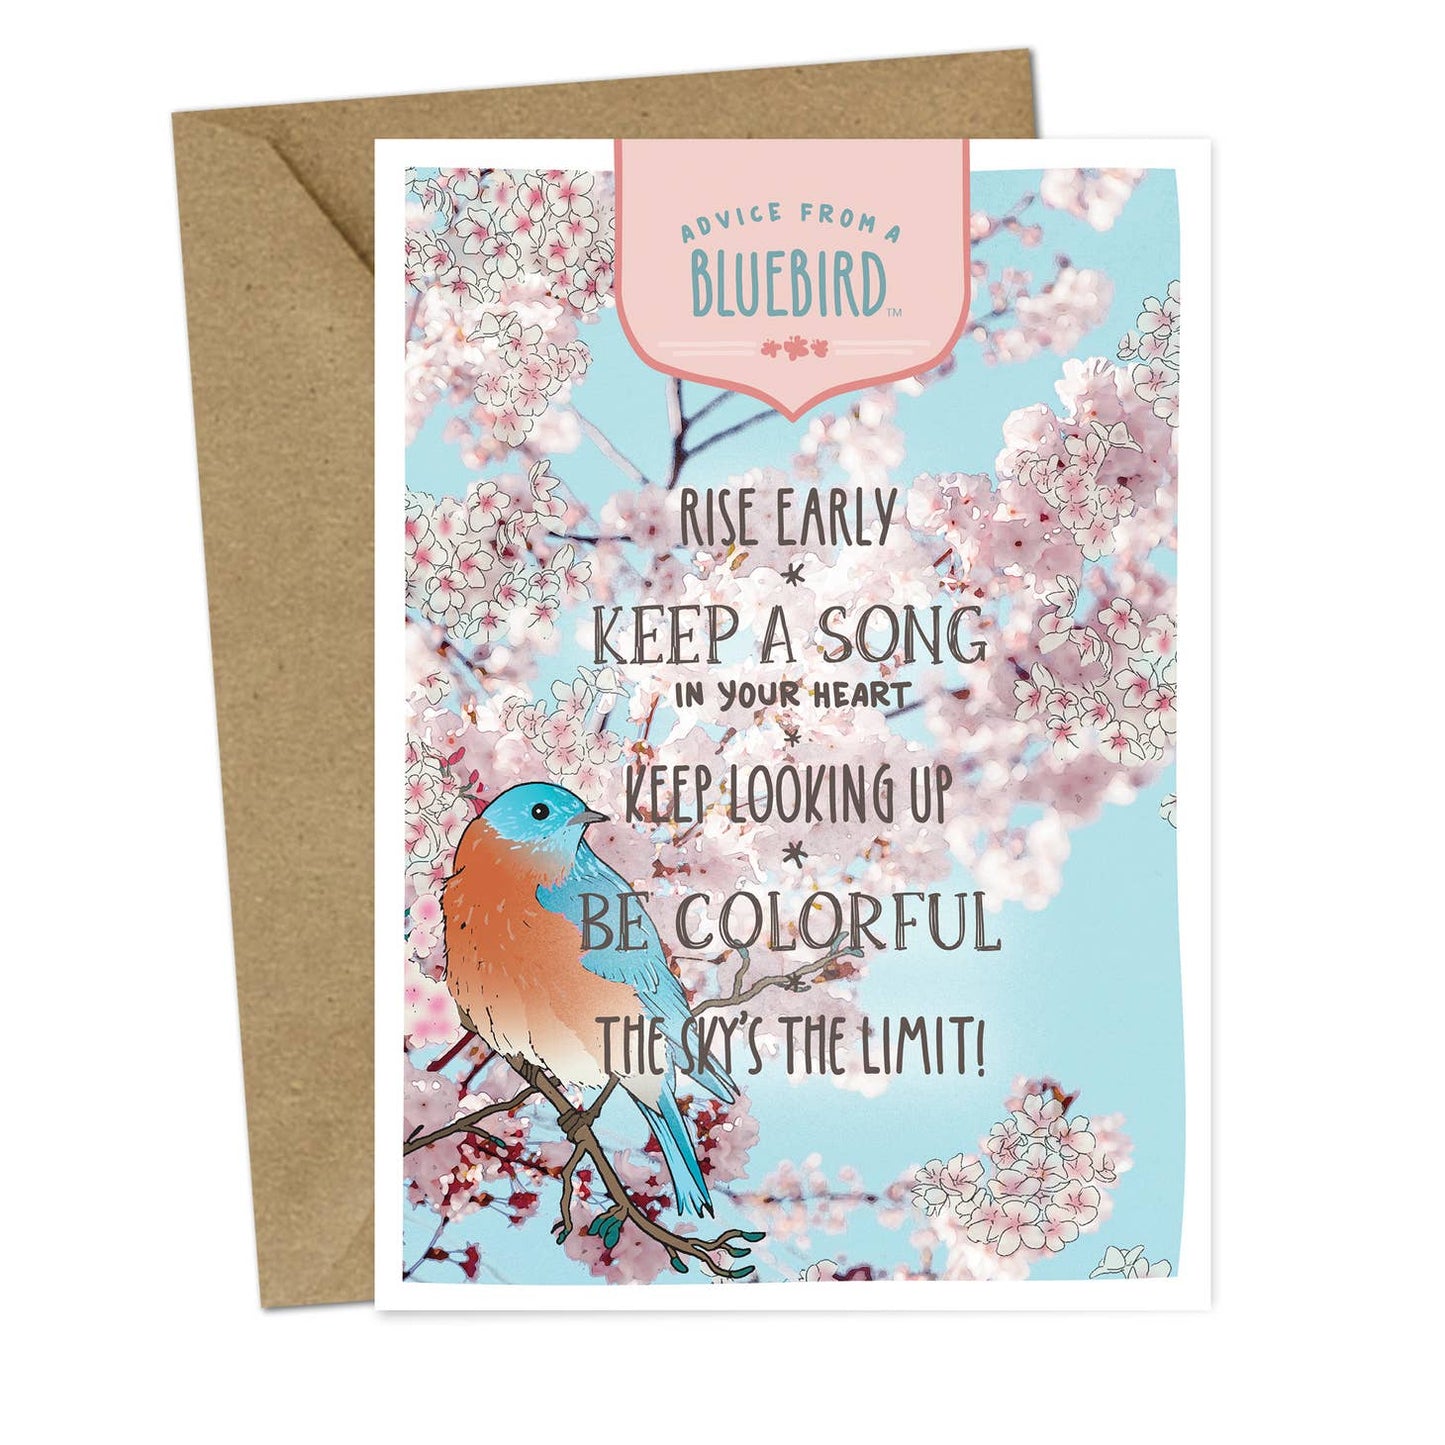 Advice from a Bluebird Greeting Card